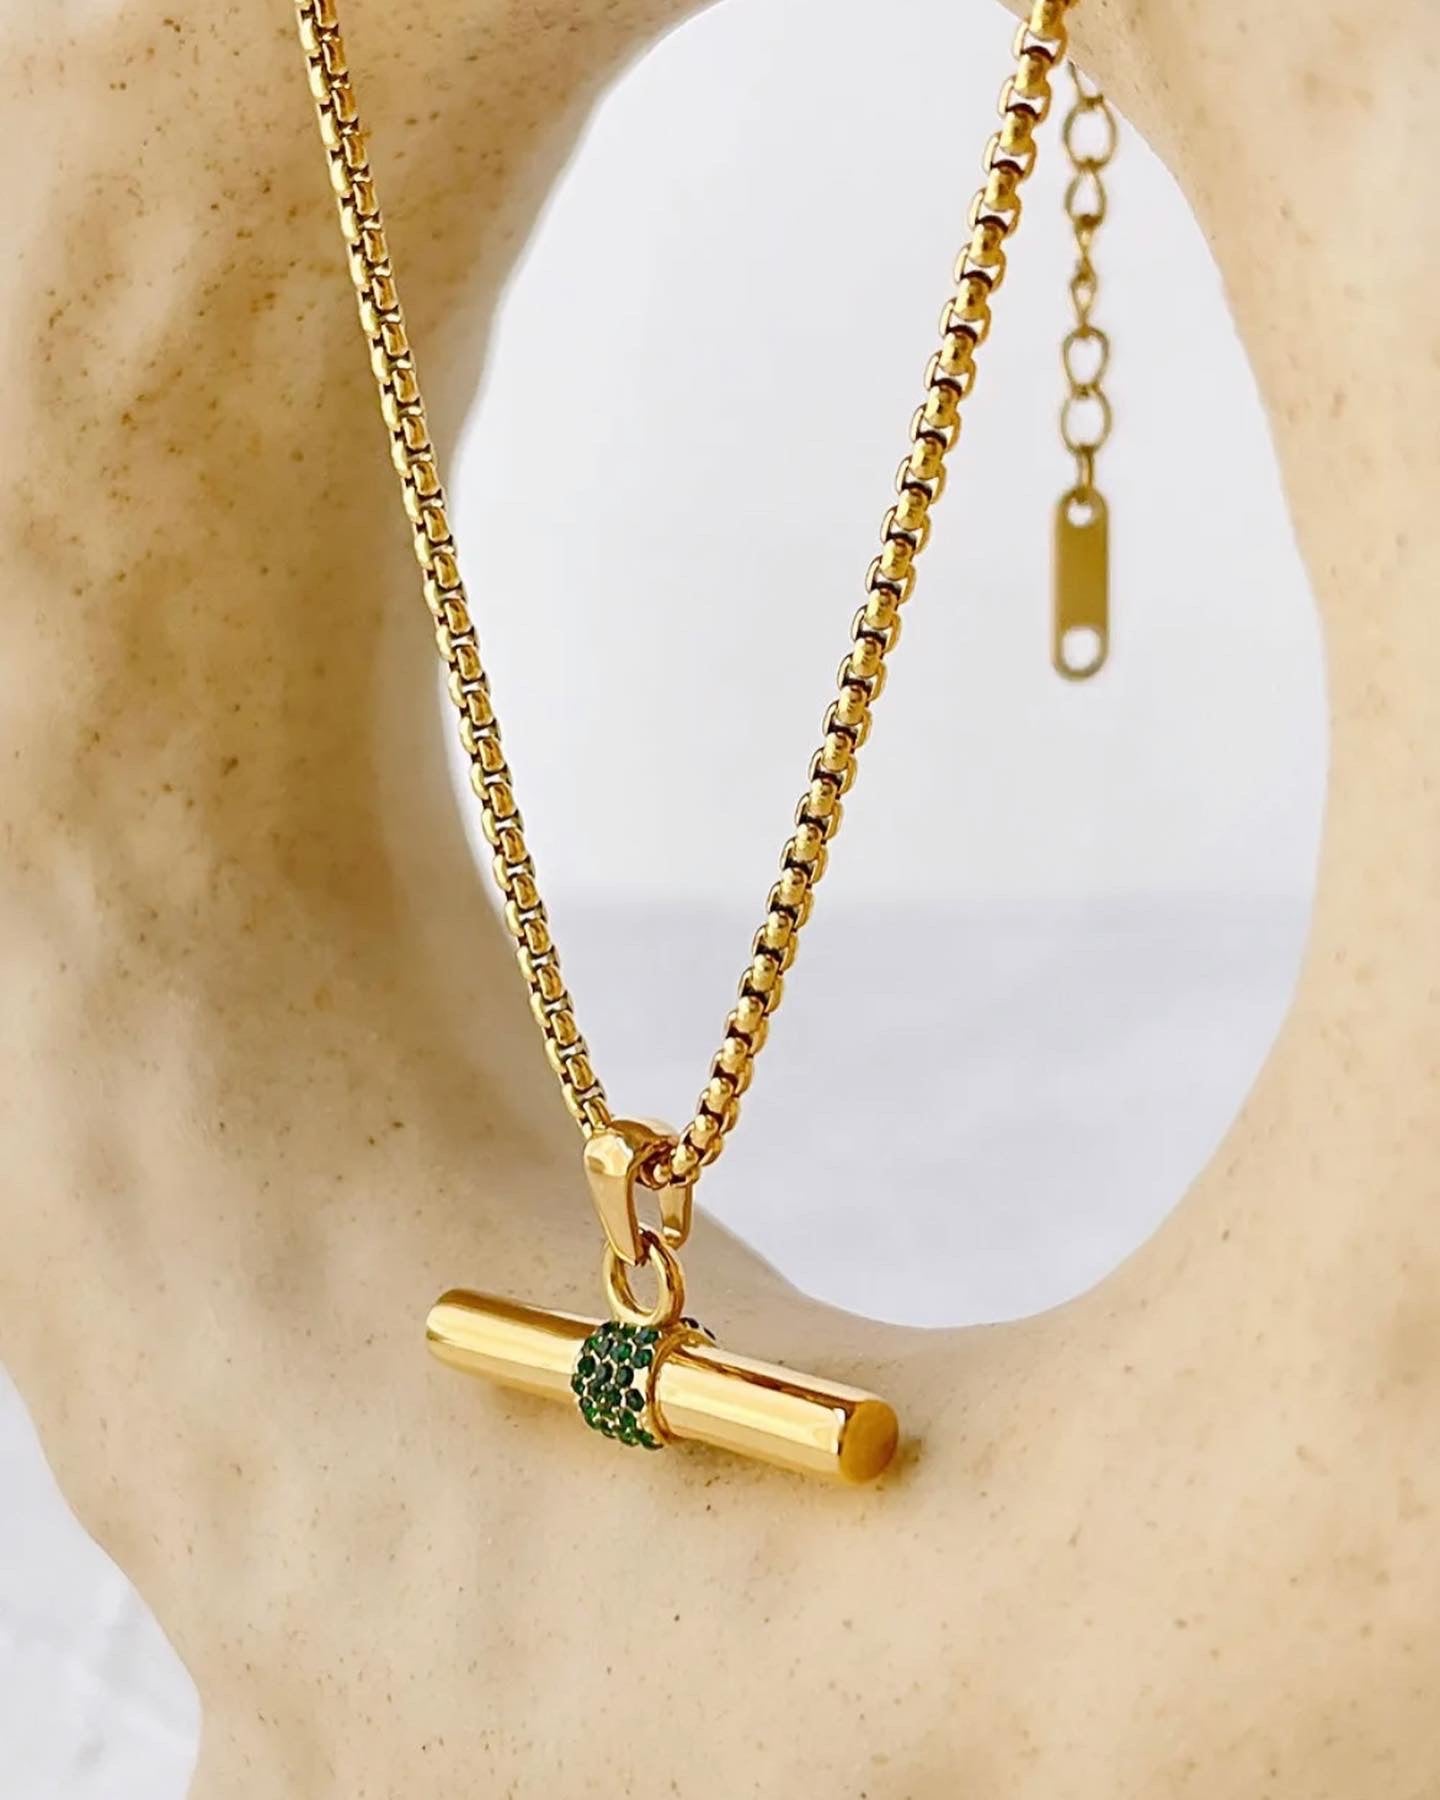 T Bar Necklace In Sterling Silver Or Gold Vermeil By Muru |  notonthehighstreet.com